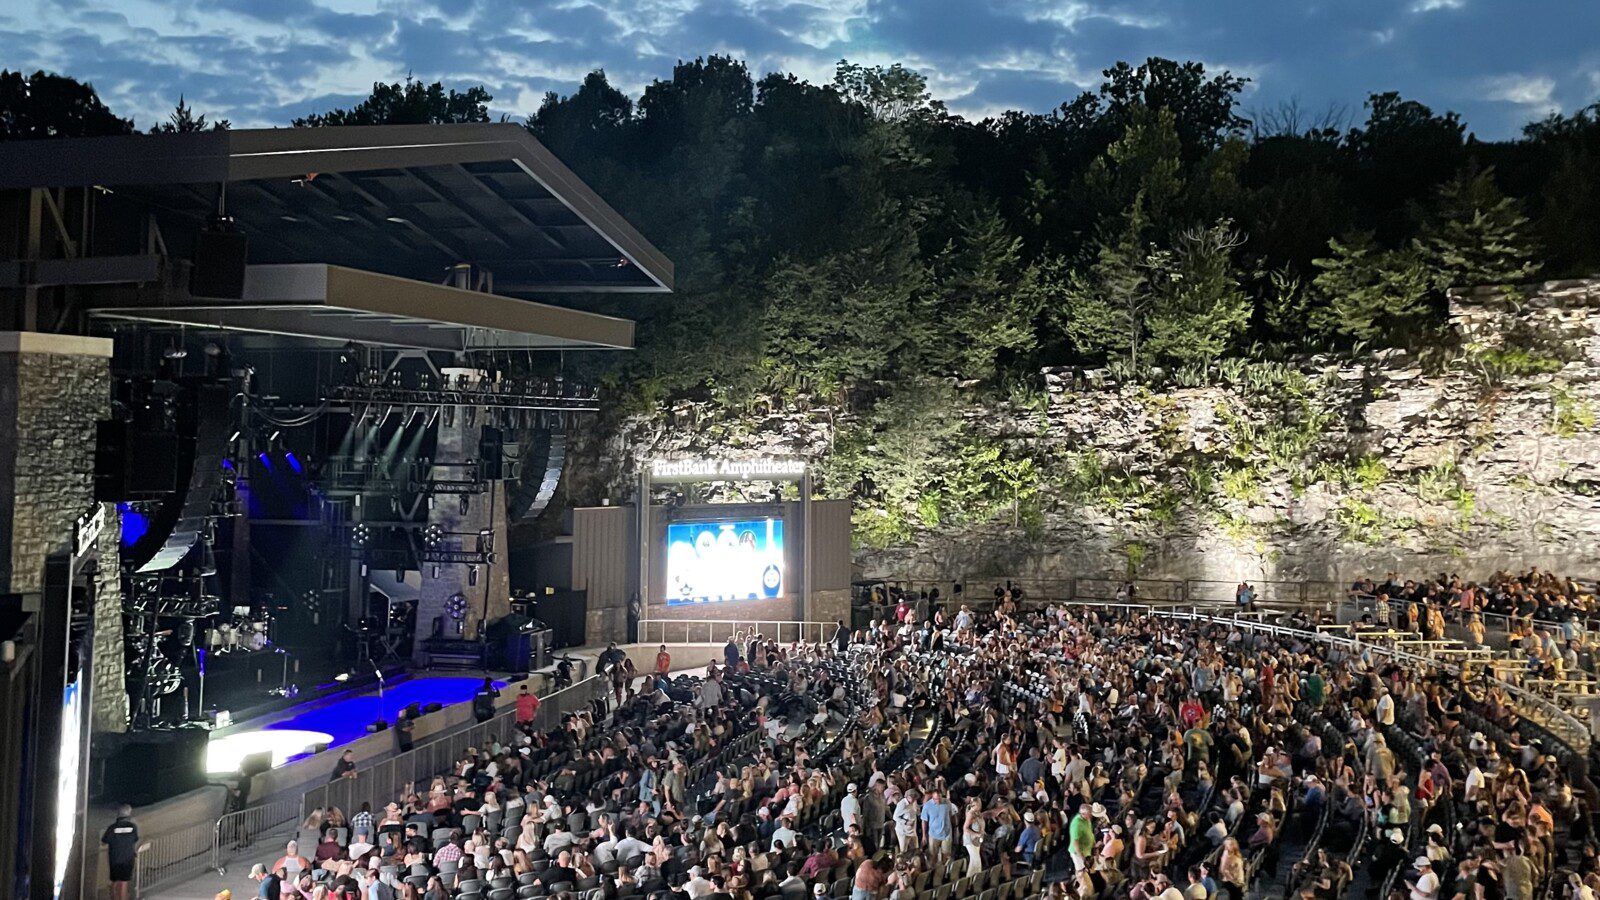 Graystone Quarry & FirstBank Amphitheater Concert in Franklin, Tennessee.